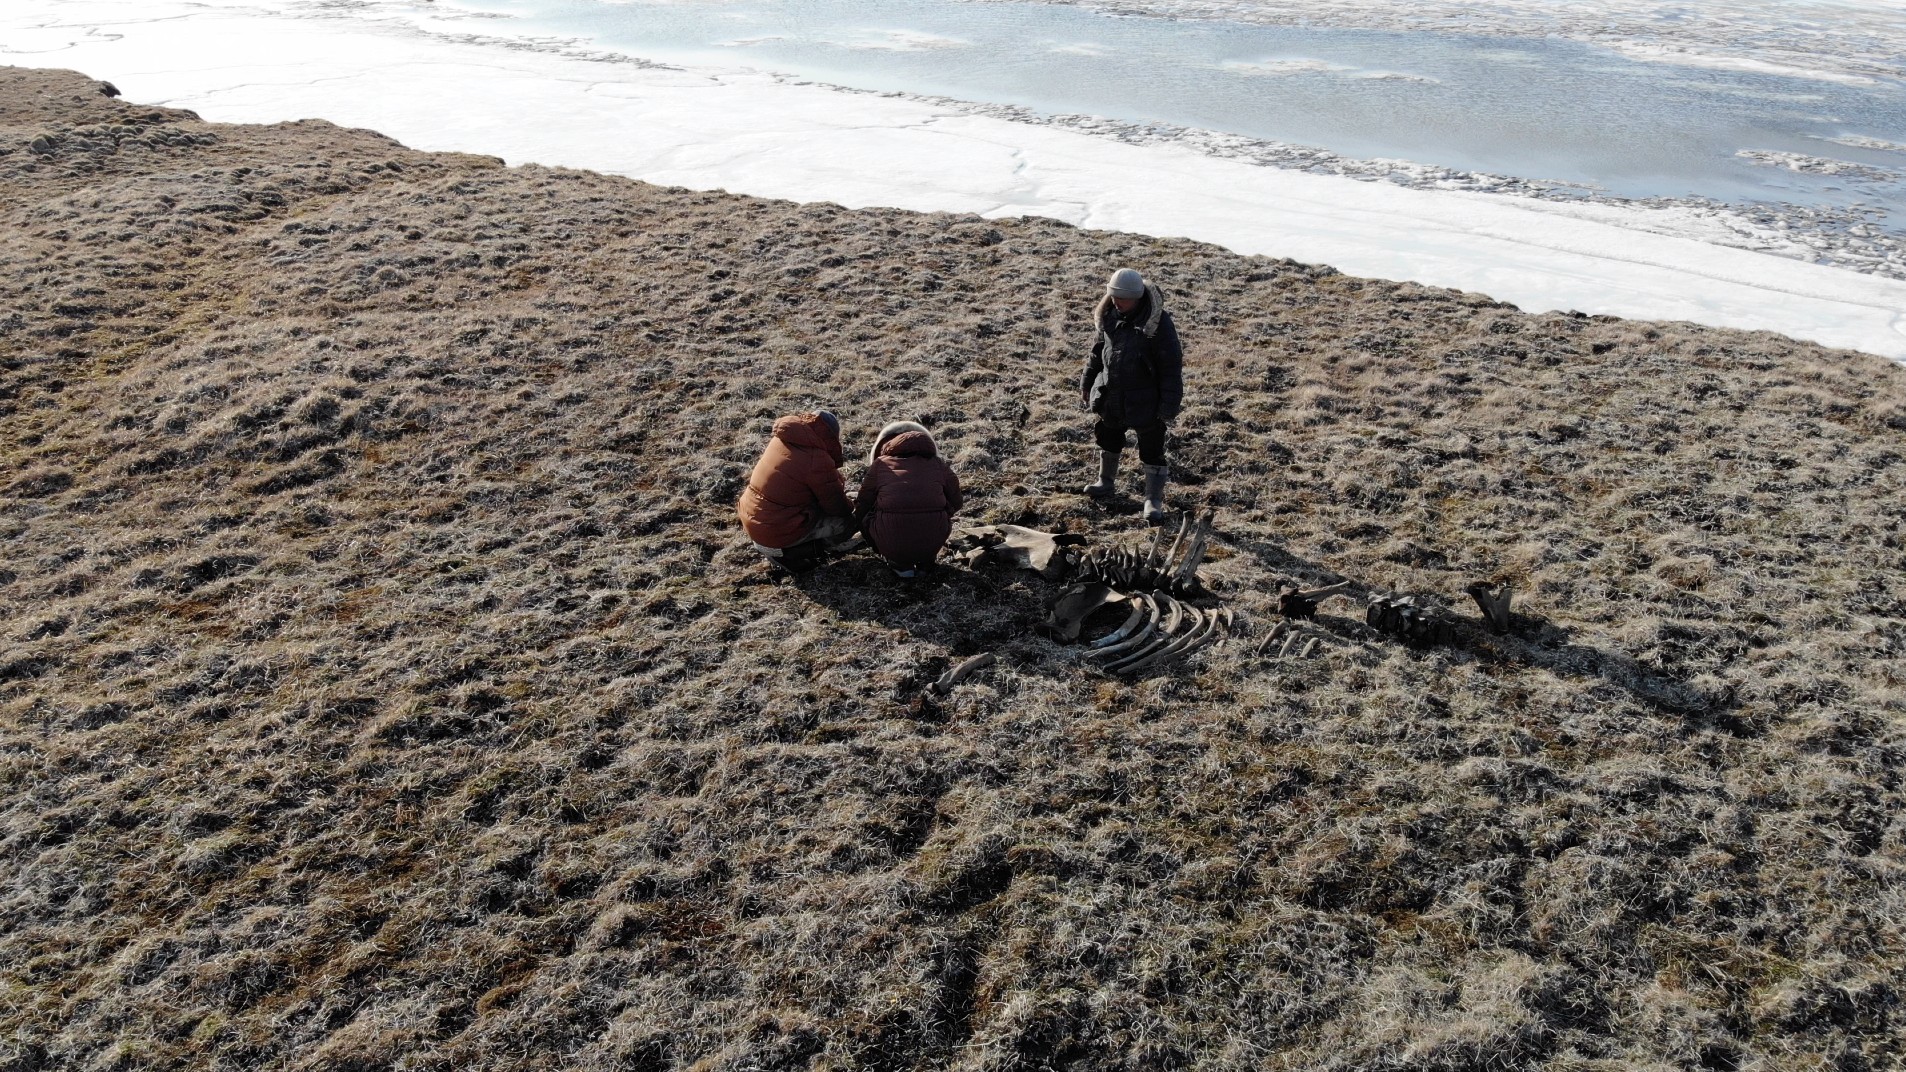 Russian expedition finds evidence of northernmost Stone Age hunters above the Arctic Circle | Tom Metcalfe | 11 days ago